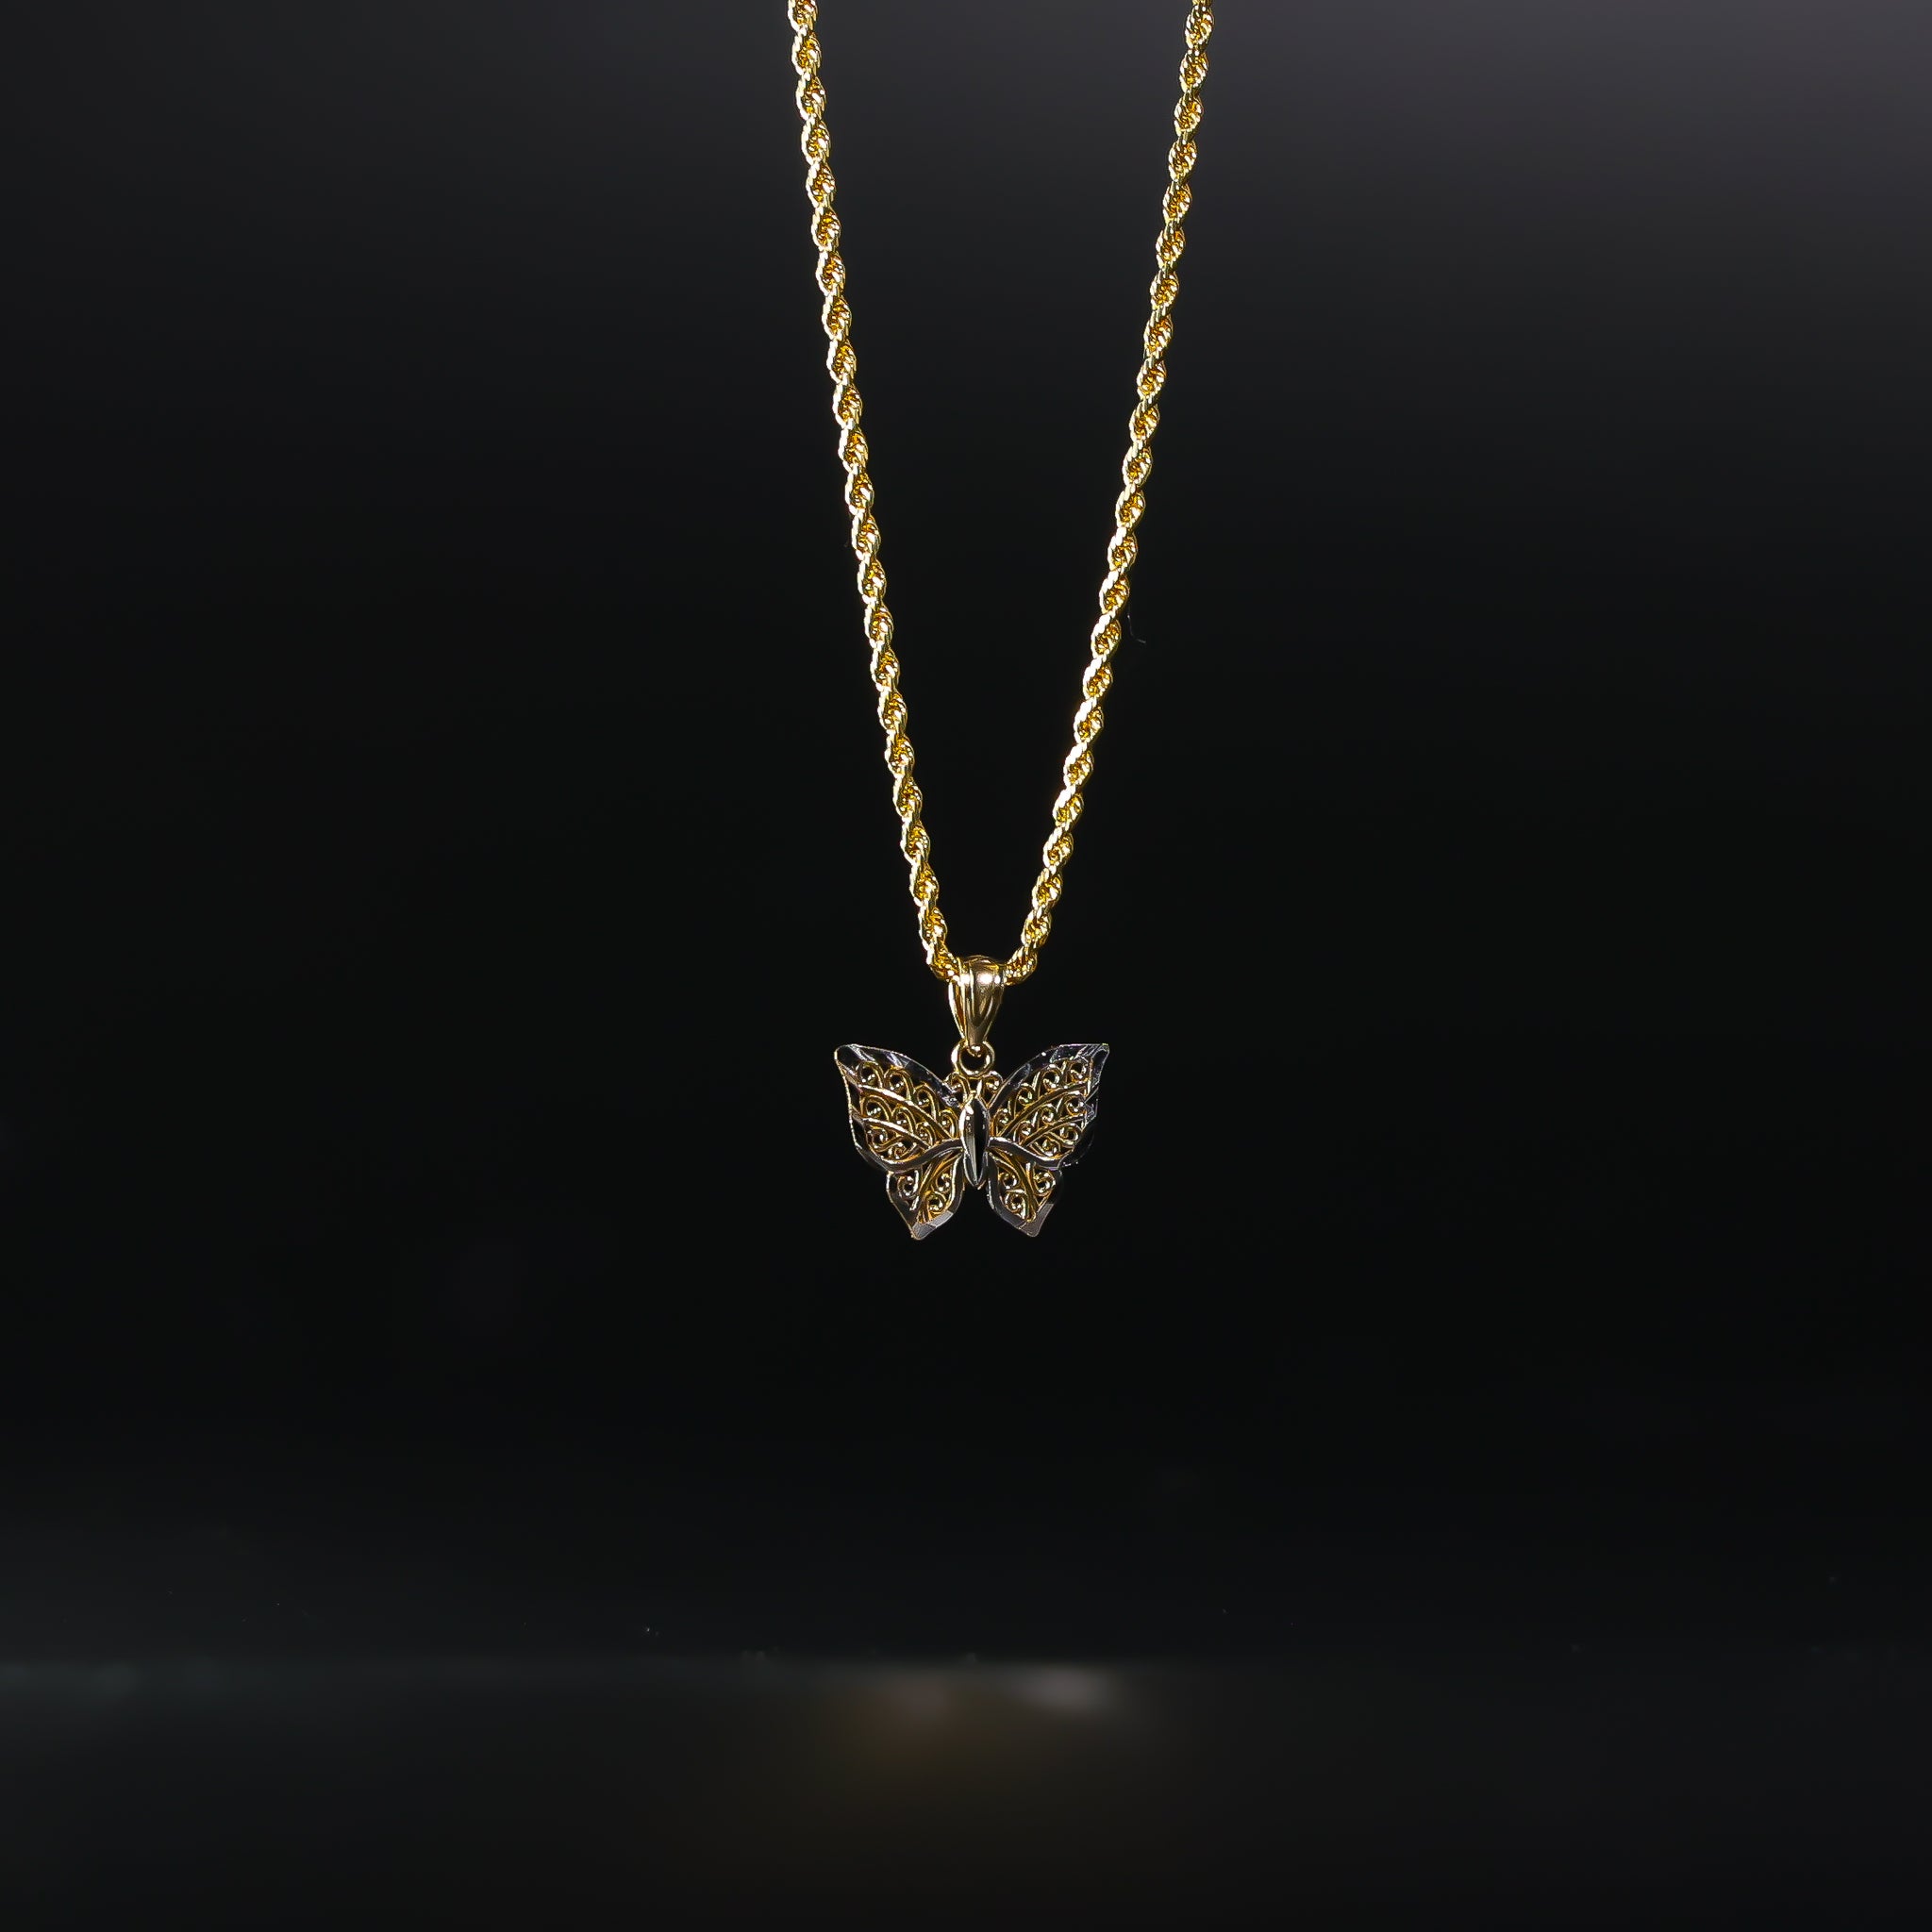 Gold Butterfly Pendant Model-434 - Charlie & Co. Jewelry